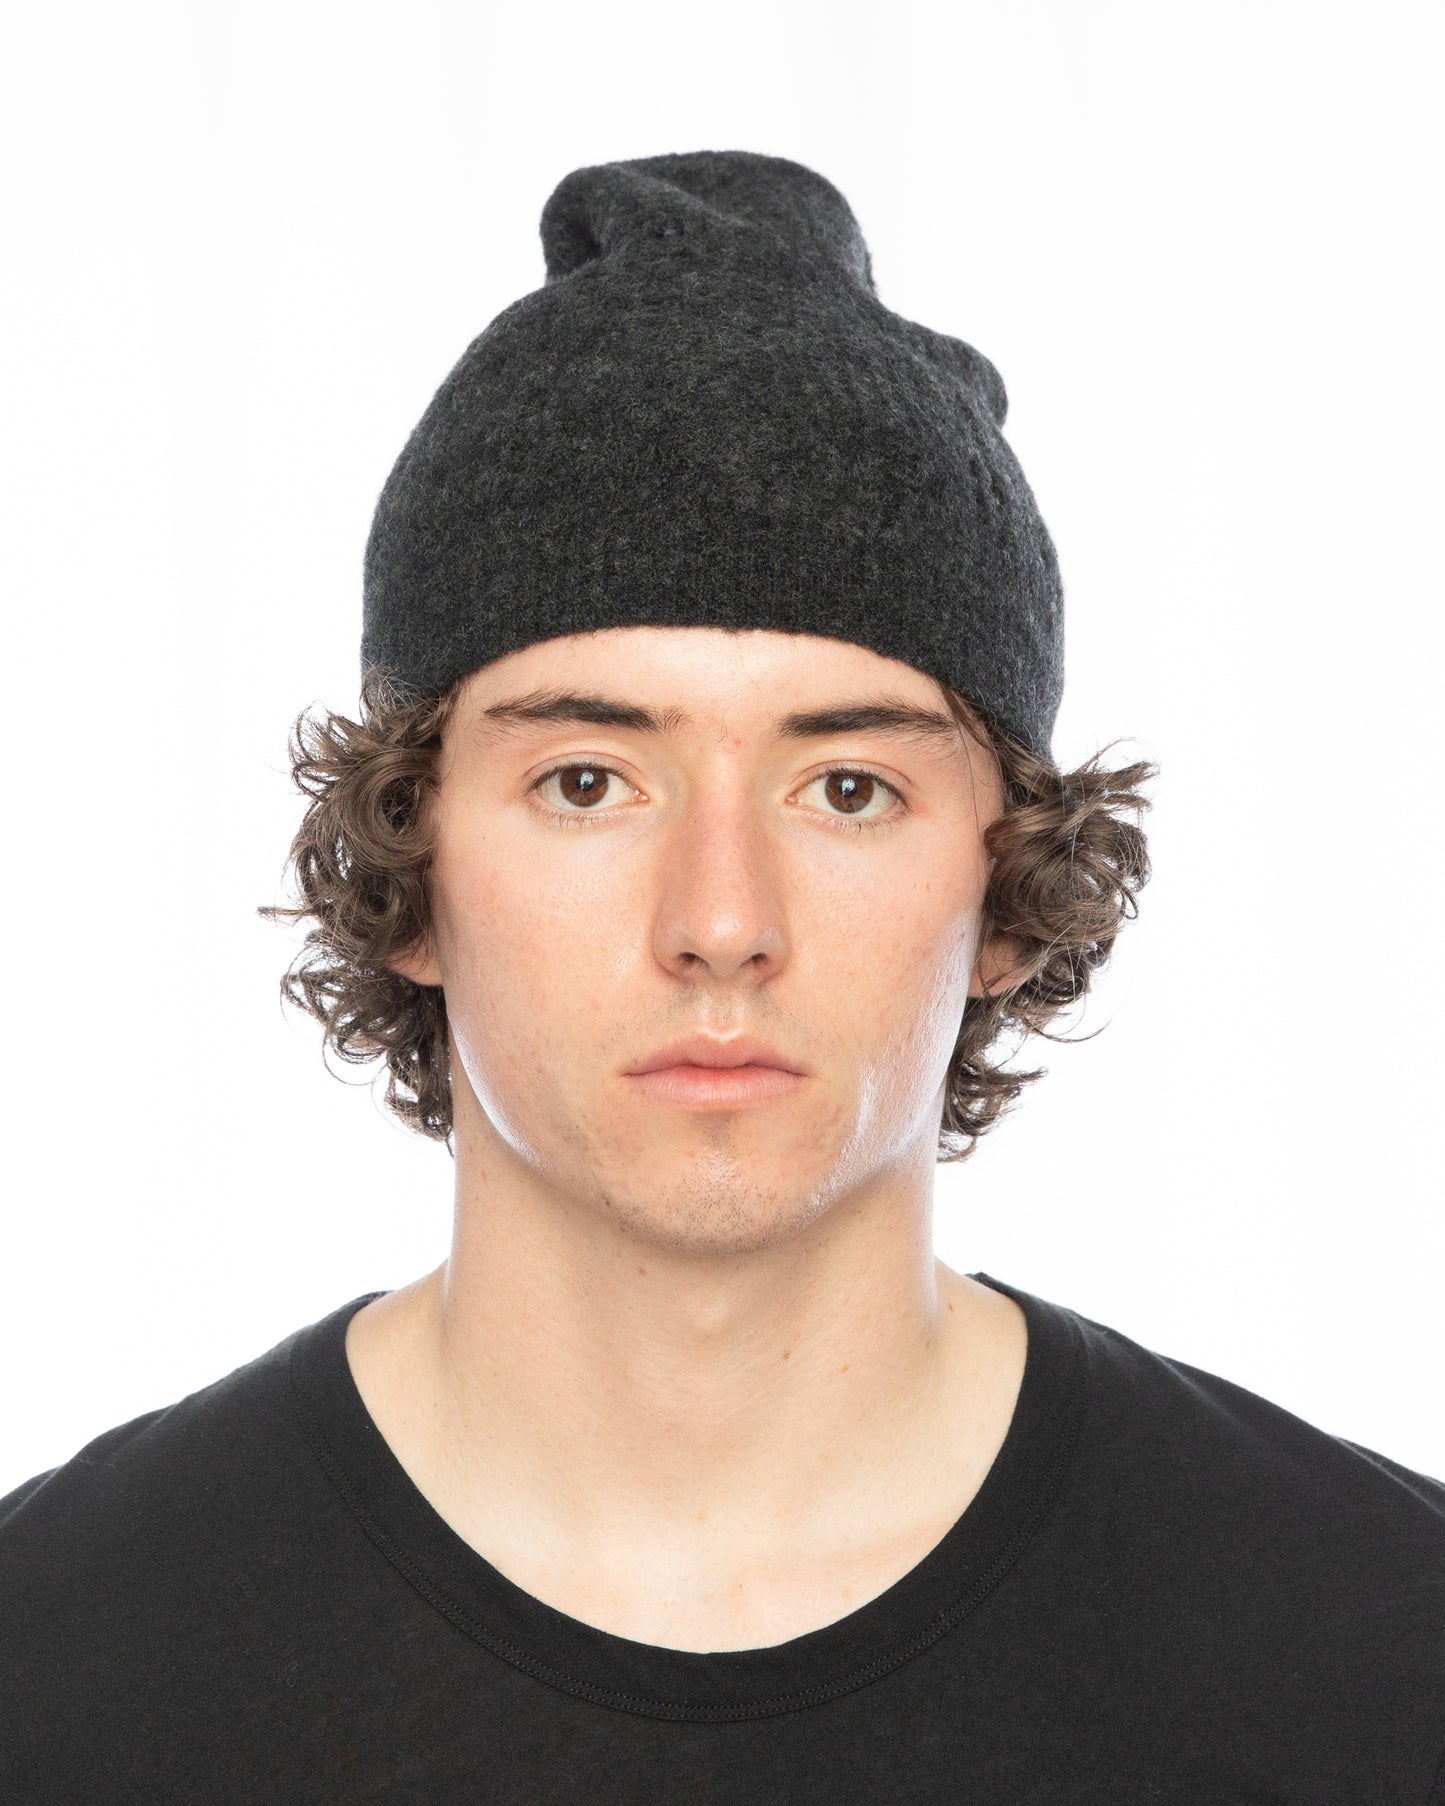 Graphite Destroyed Cut-Outs Wool Yak Knit Beanie